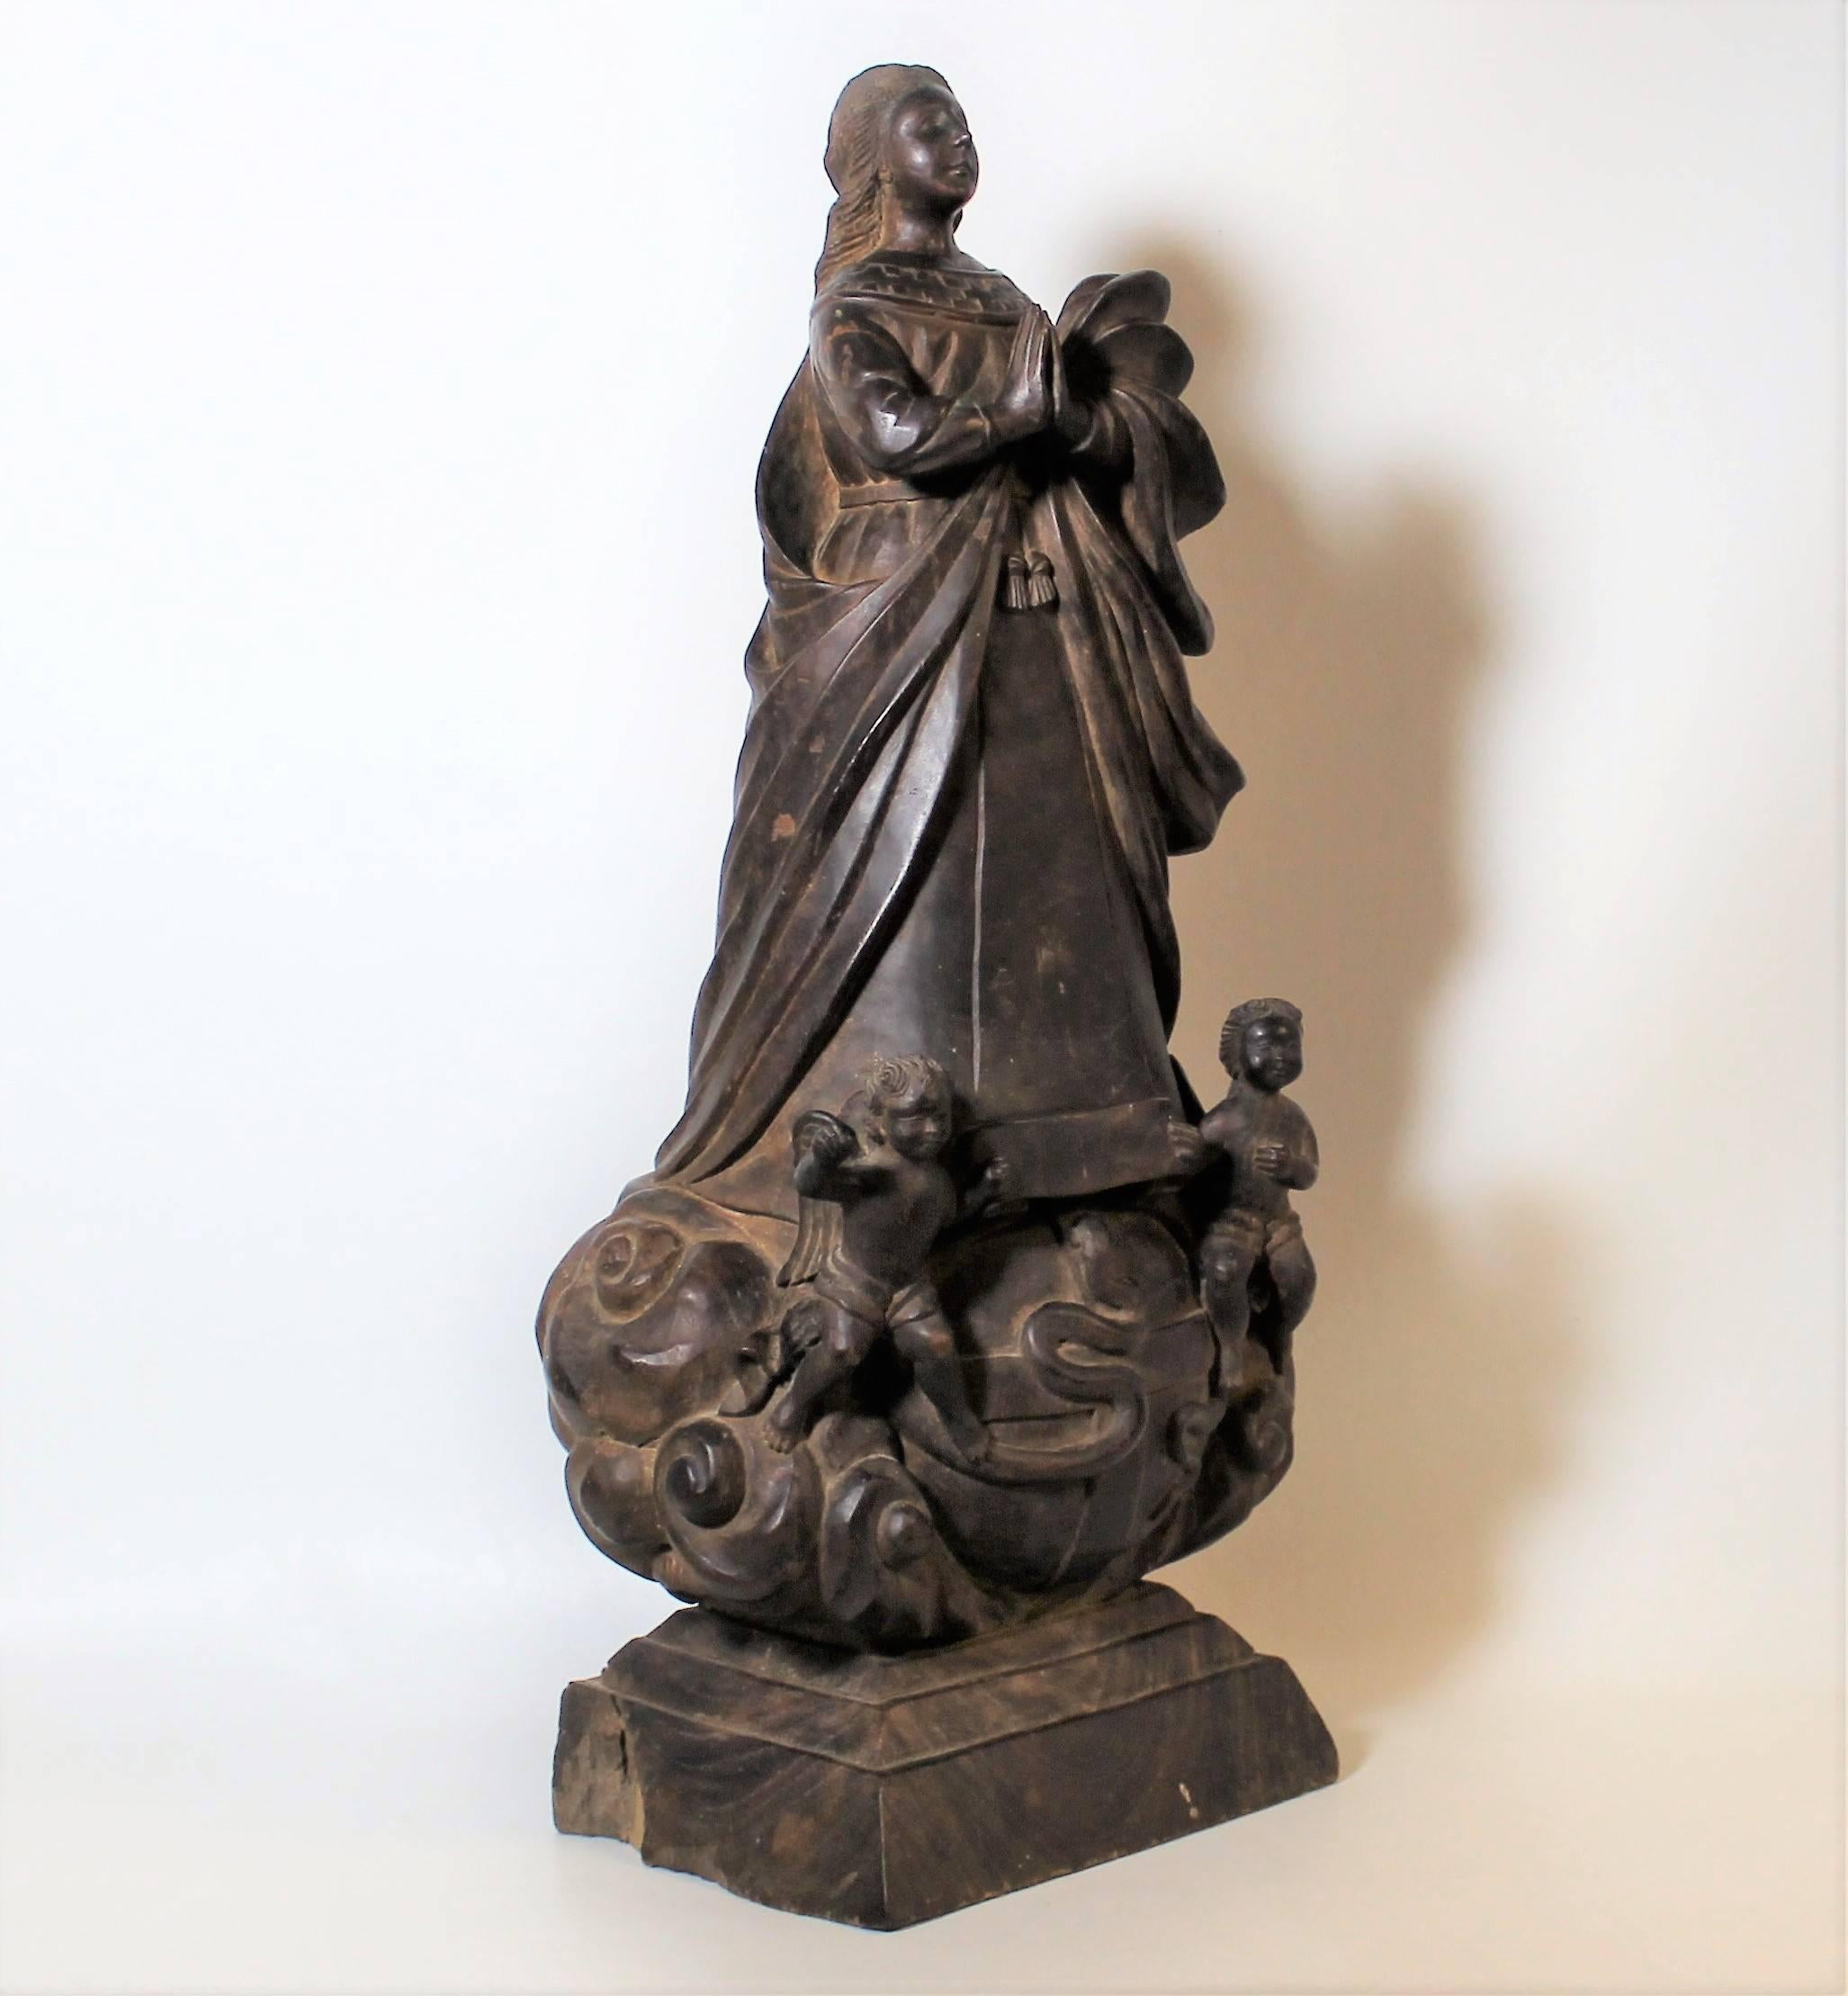 17th Century wood carving of the Virgin of the Immaculate Conception. This sculpture features the Virgin Mary atop the world with a serpent and angels at her feet.